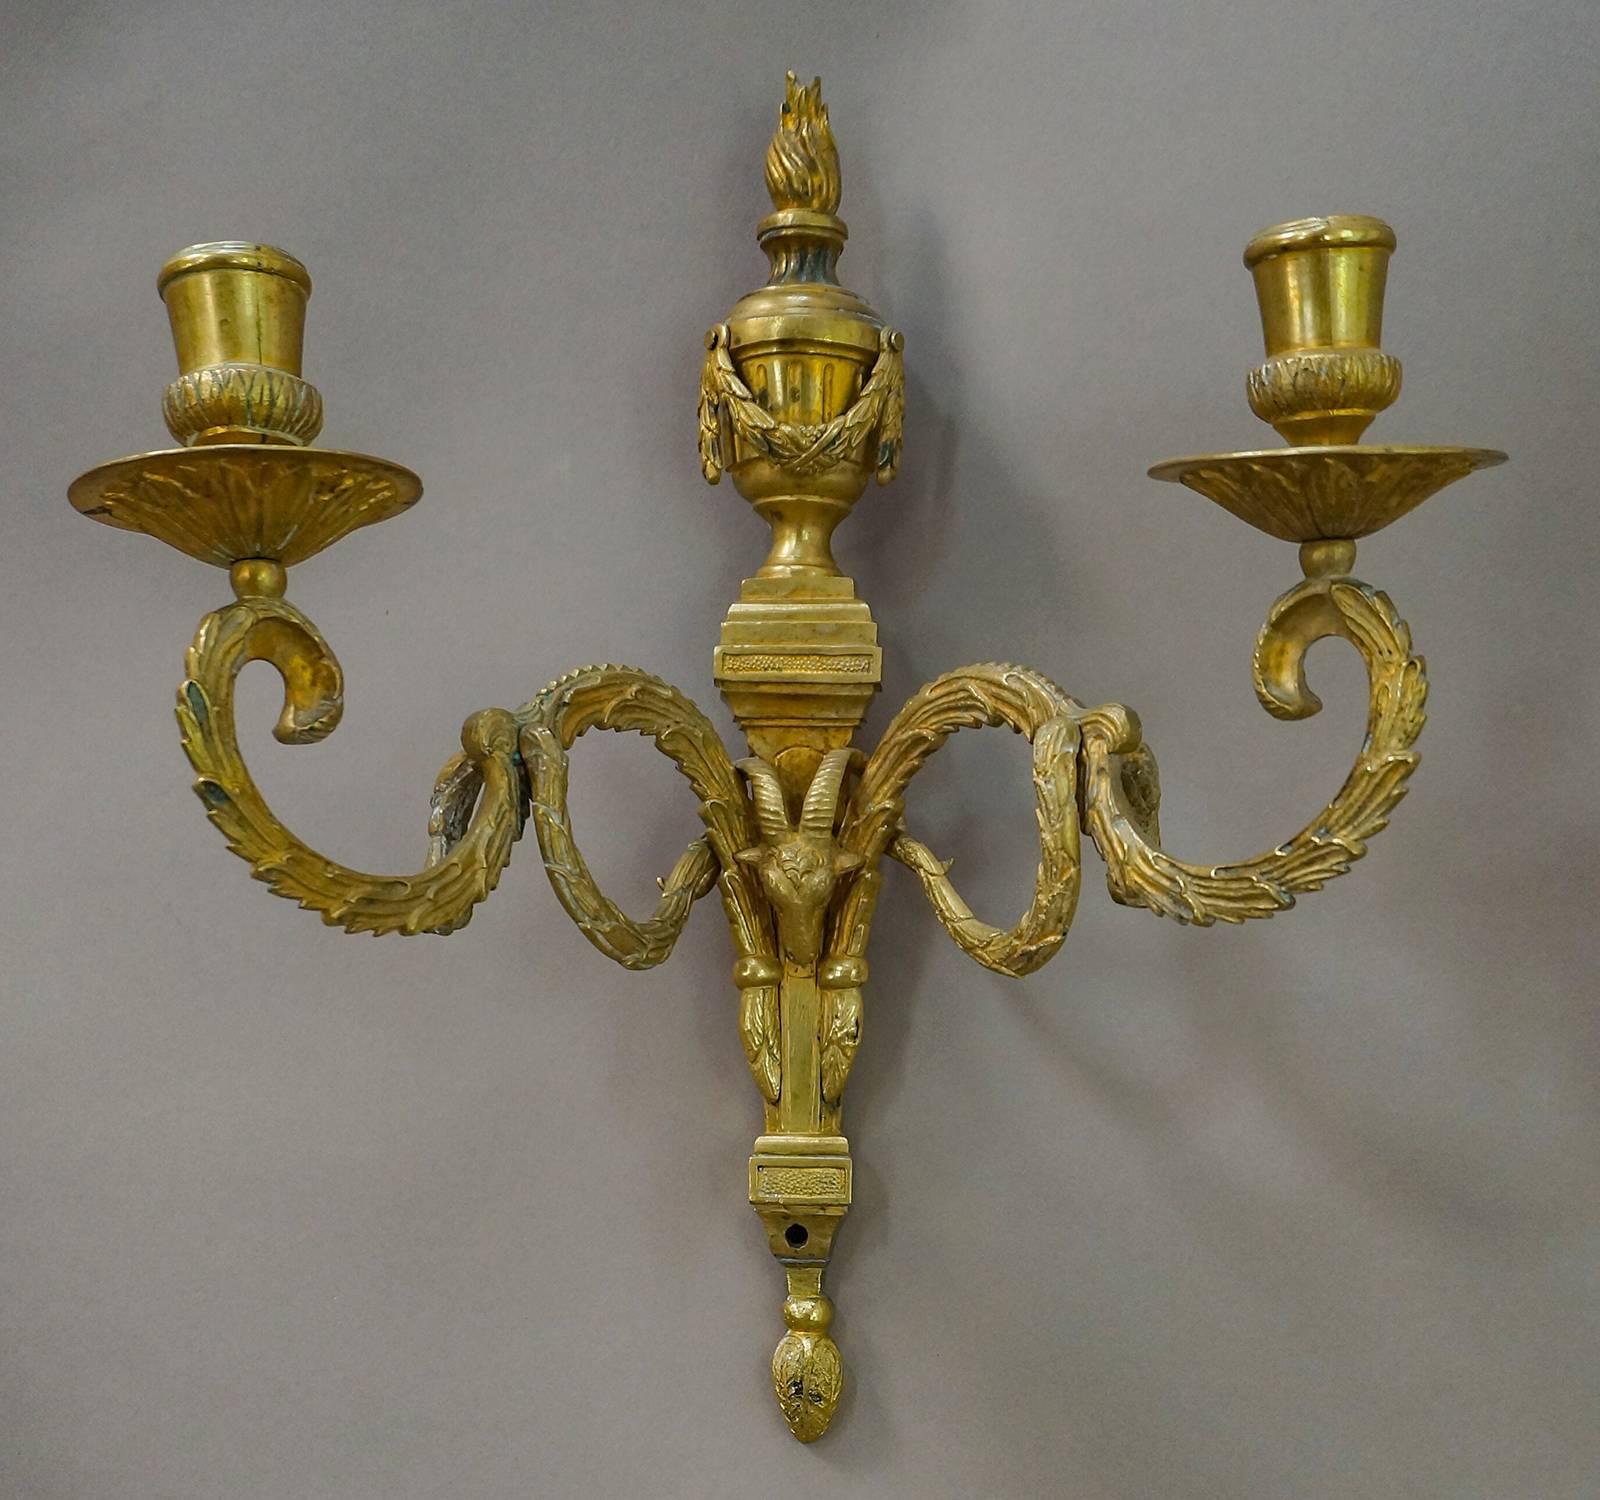 Pair of Gustavian bronze candle sconces, Sweden, circa 1760, with two lights in each. Wonderfully detailed casting with flaming urns, rams’ heads, and acanthus swags.